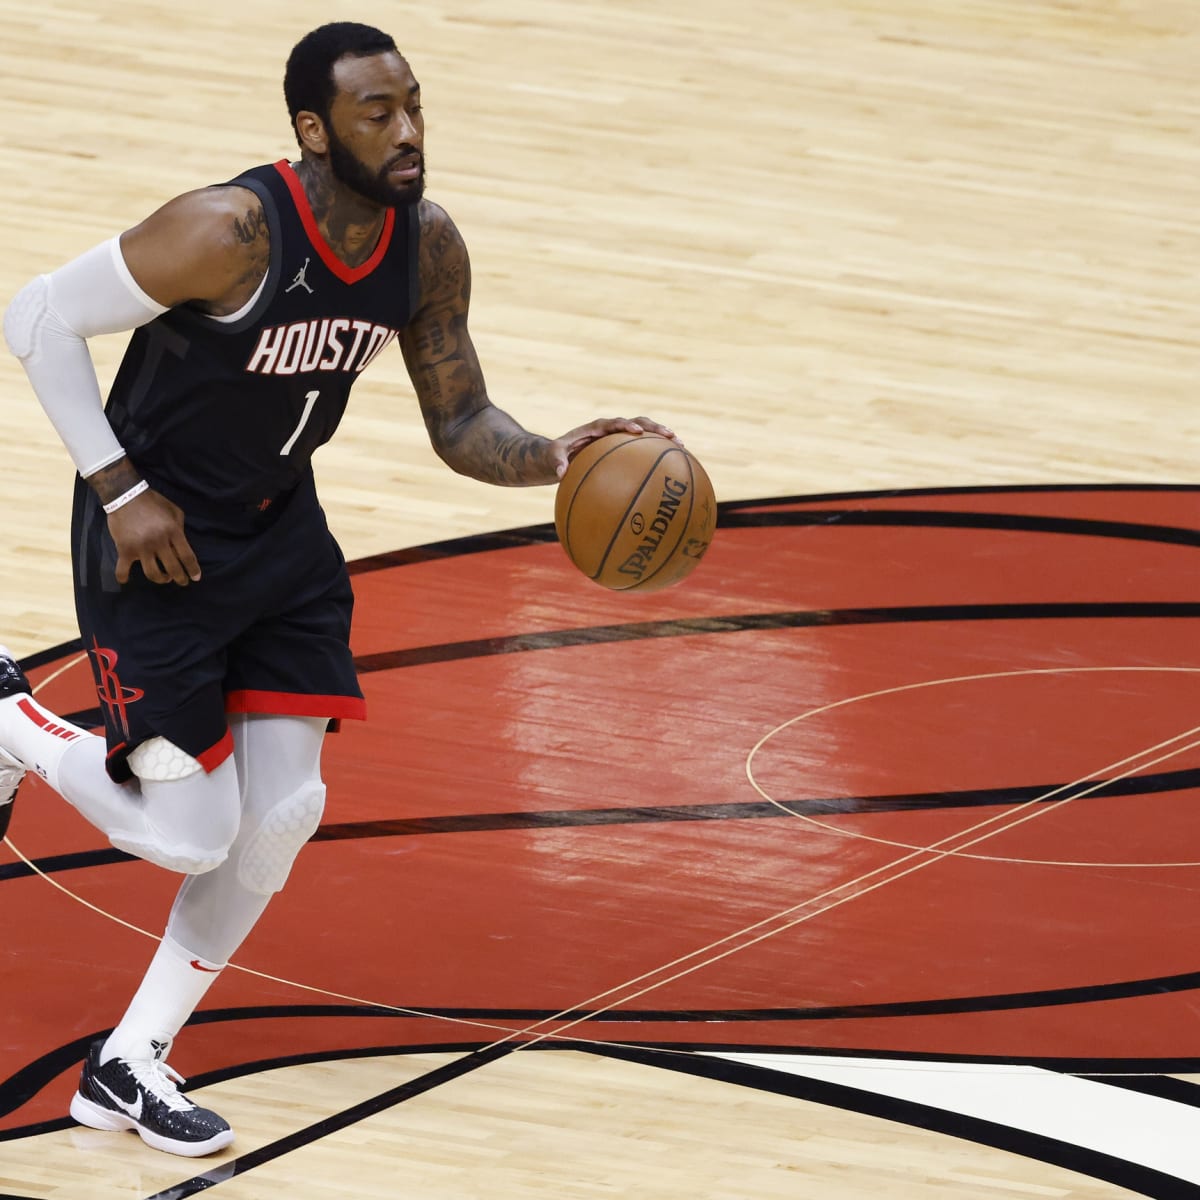 John Wall Expected To Remain Sidelined If Season Resumes